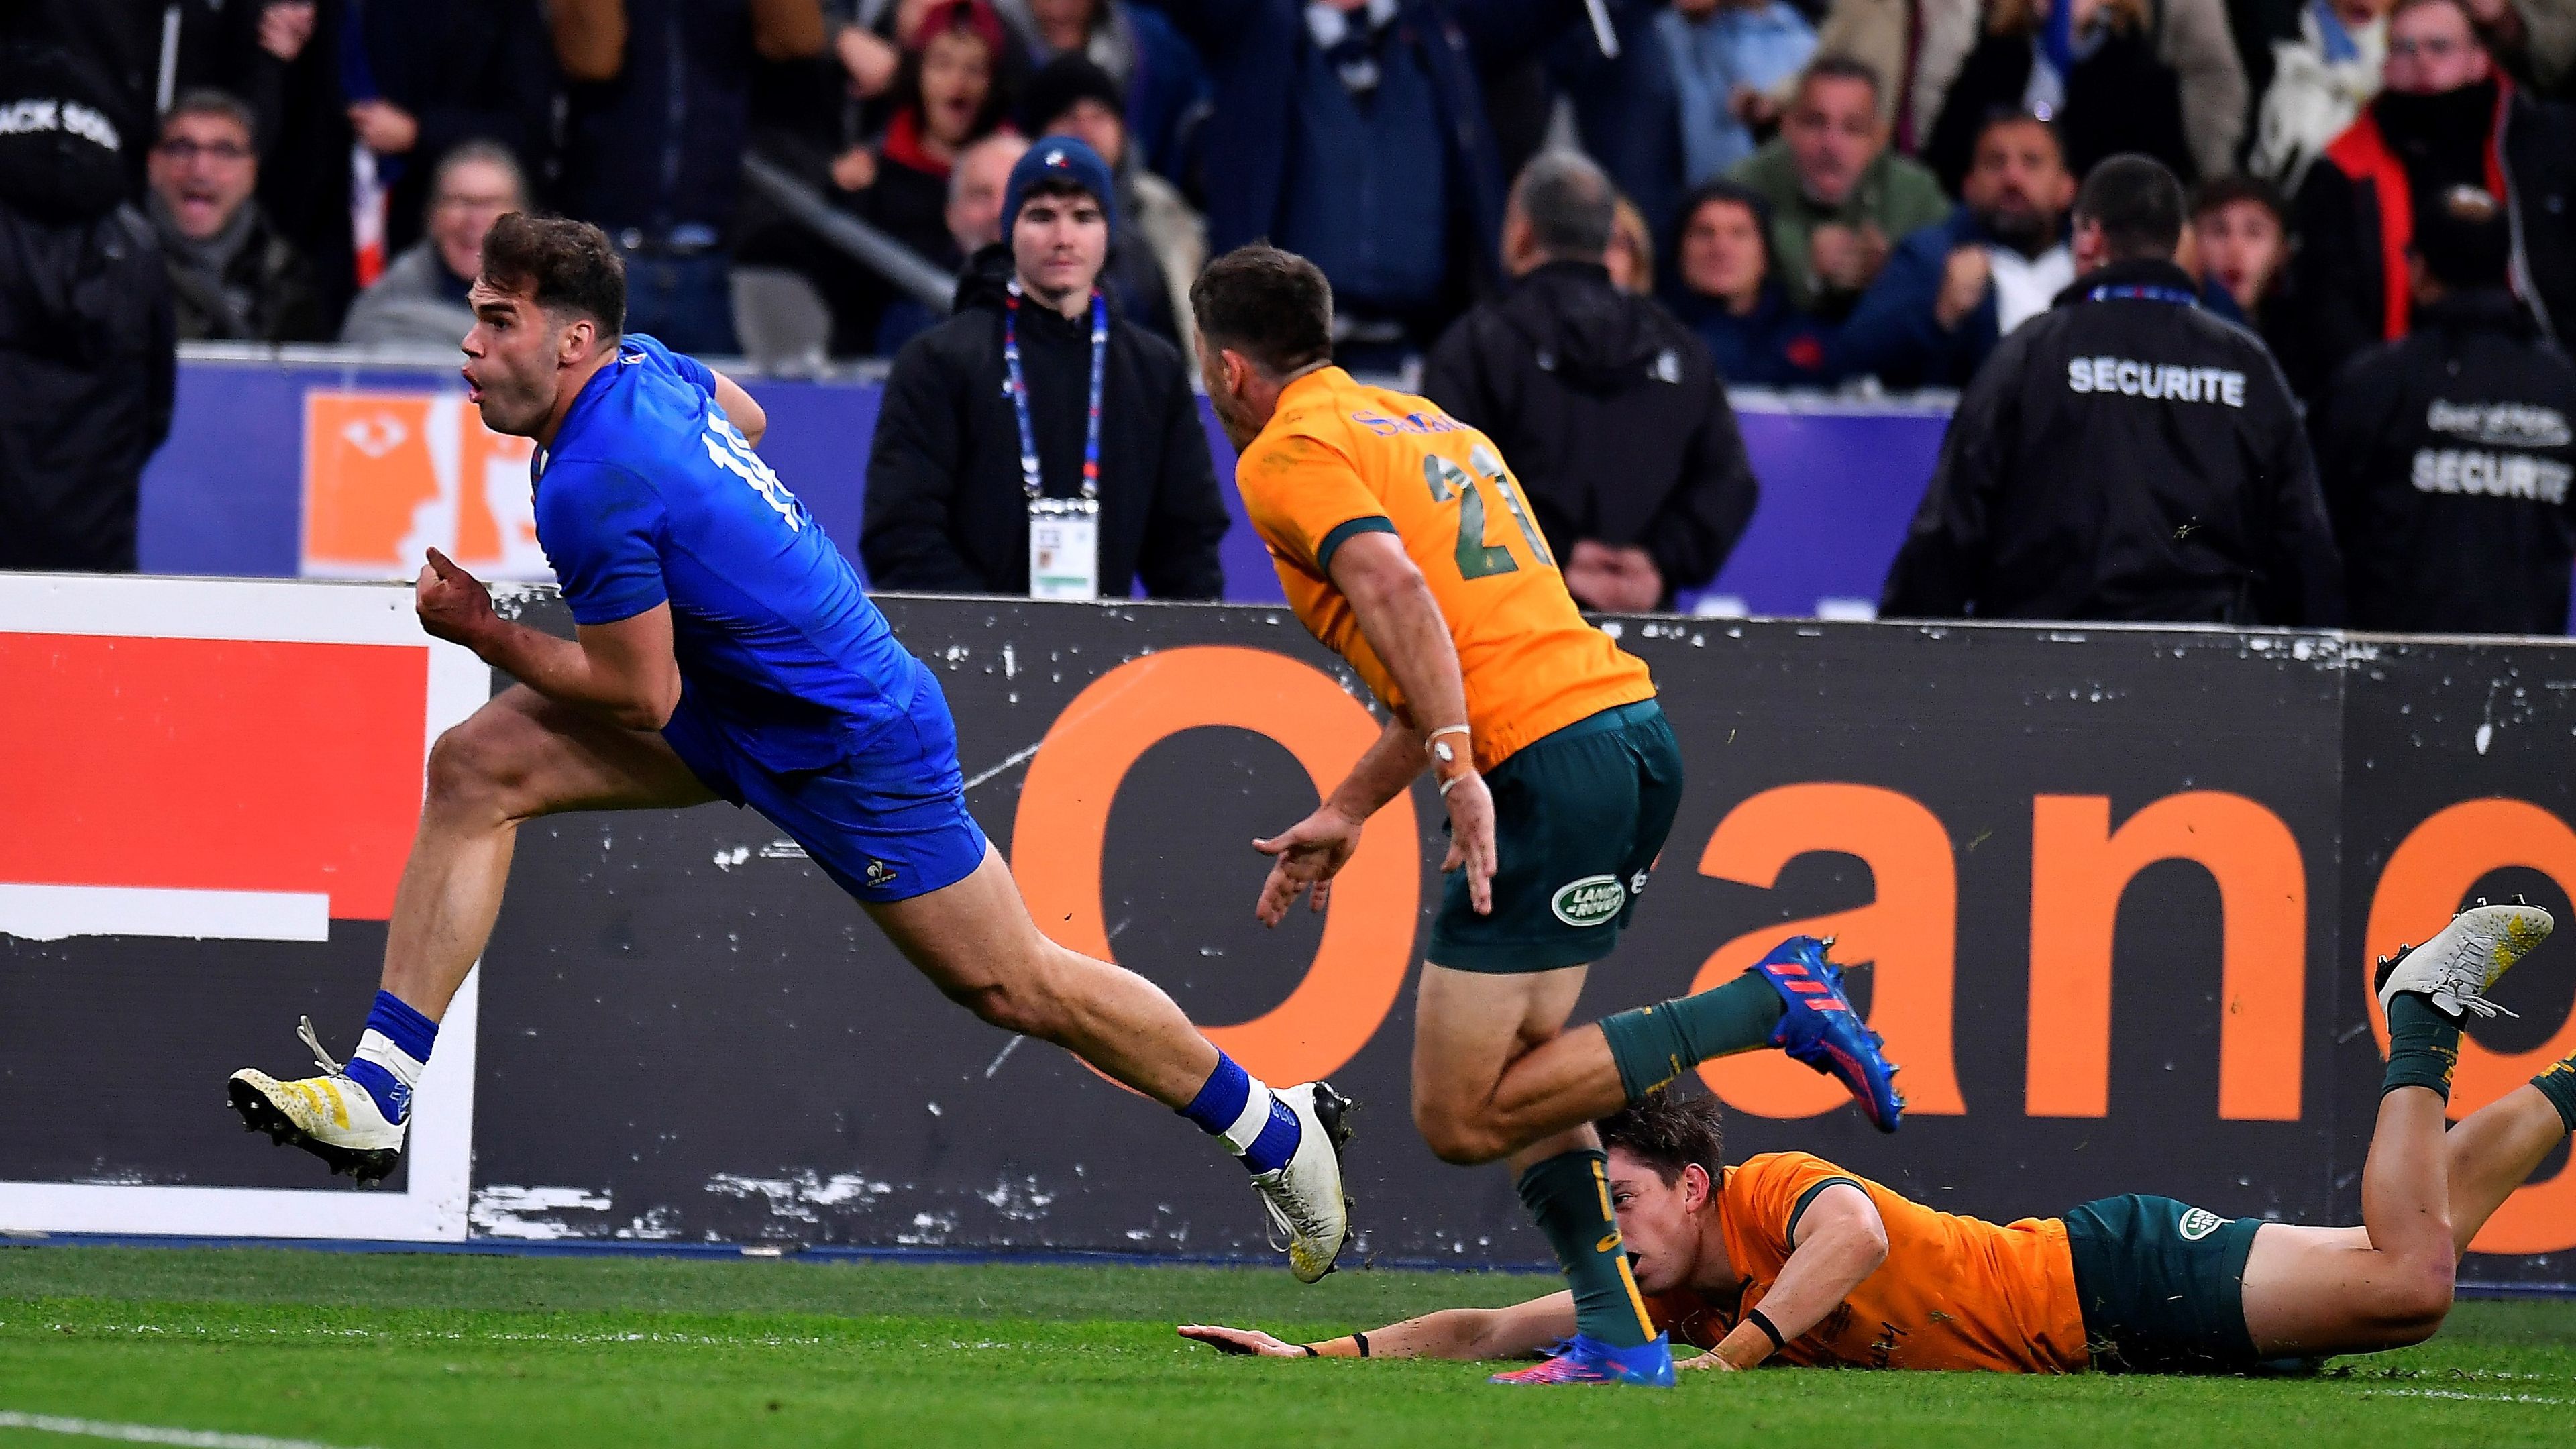 The moment Damian Penaud escaped Tom Wright and Jock Campbell to score the match-winning try for France over Australia. 